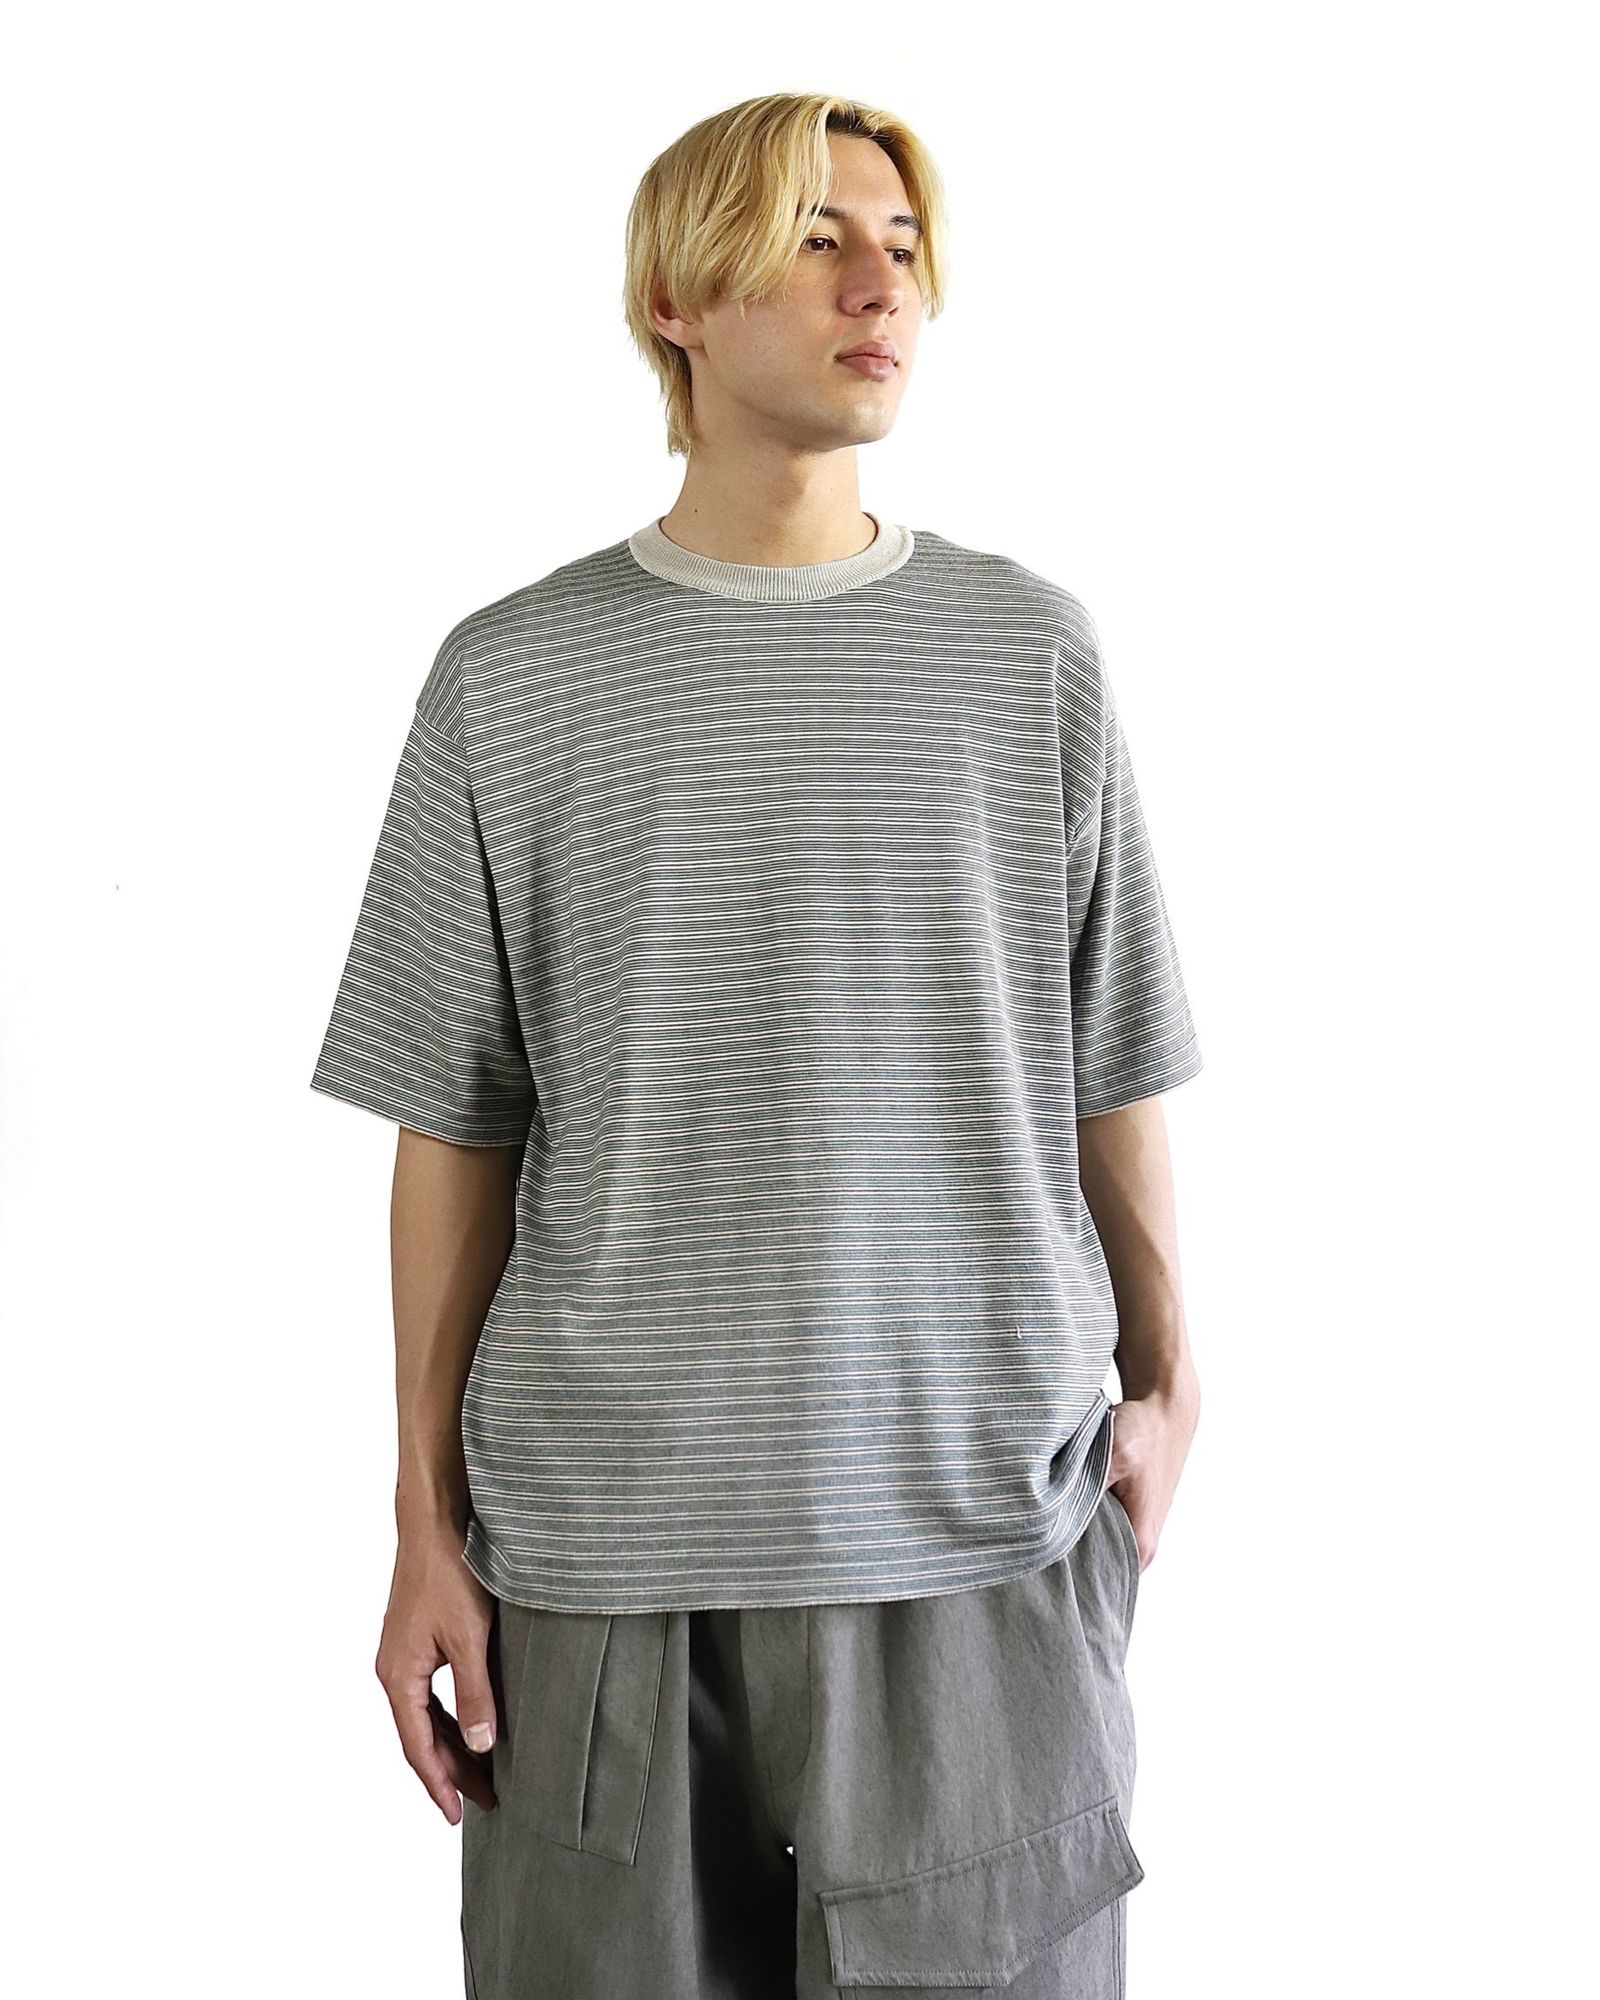 A.PRESSE 24SS High Gauge S/S Striped T-Shirt style 2024.4.13 